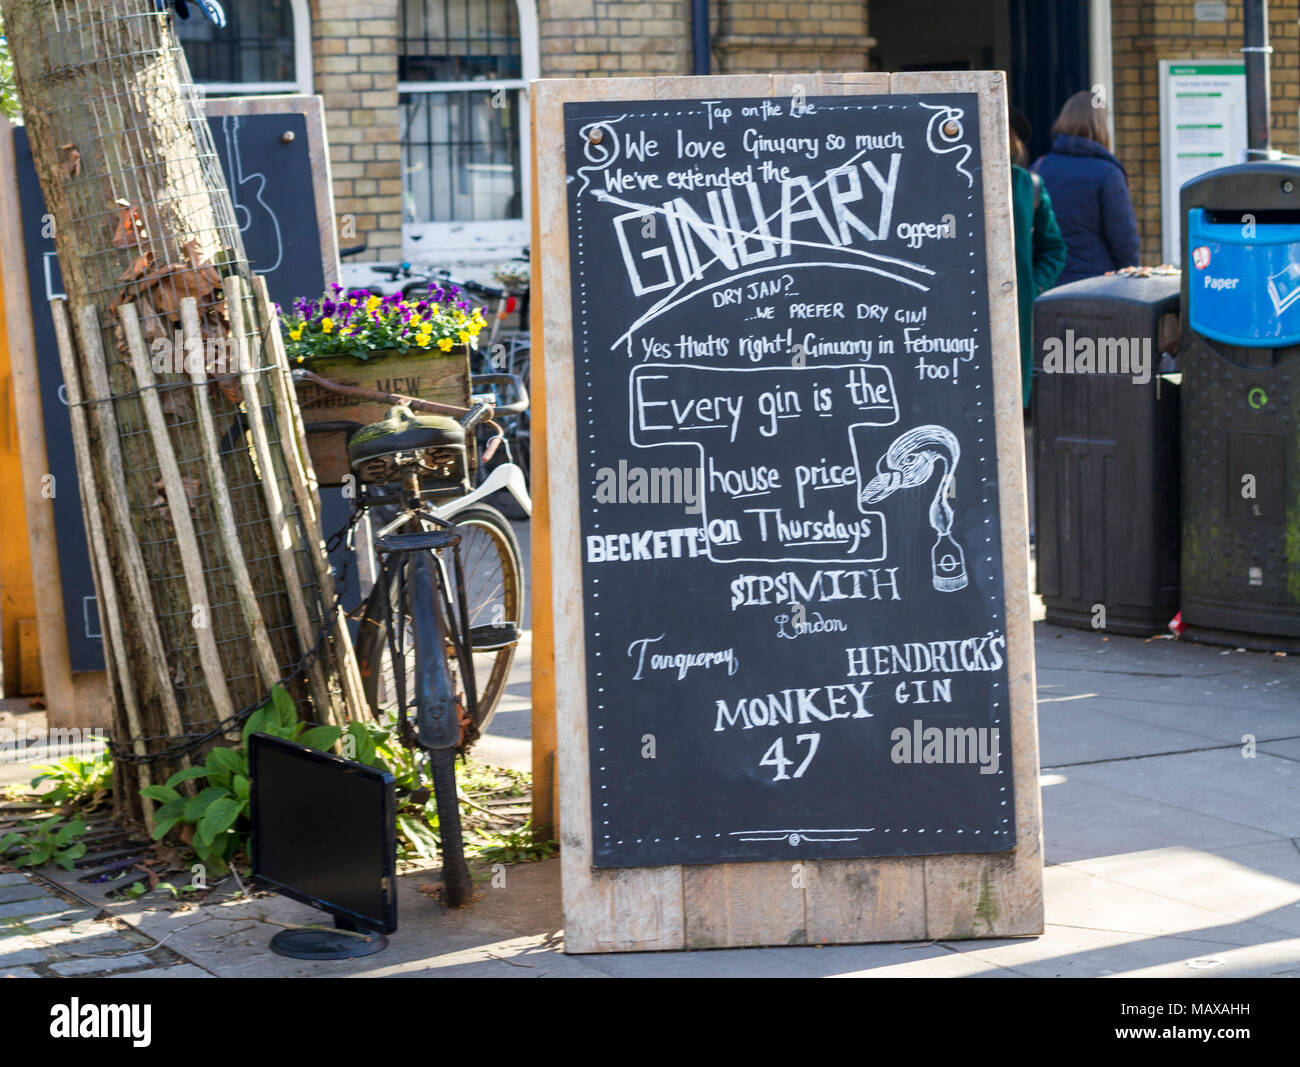 Gin Sign Blackboard sign advertisement outside the Tap on The Line Restaurant, Kew, London UK street cafe britain Stock Photo